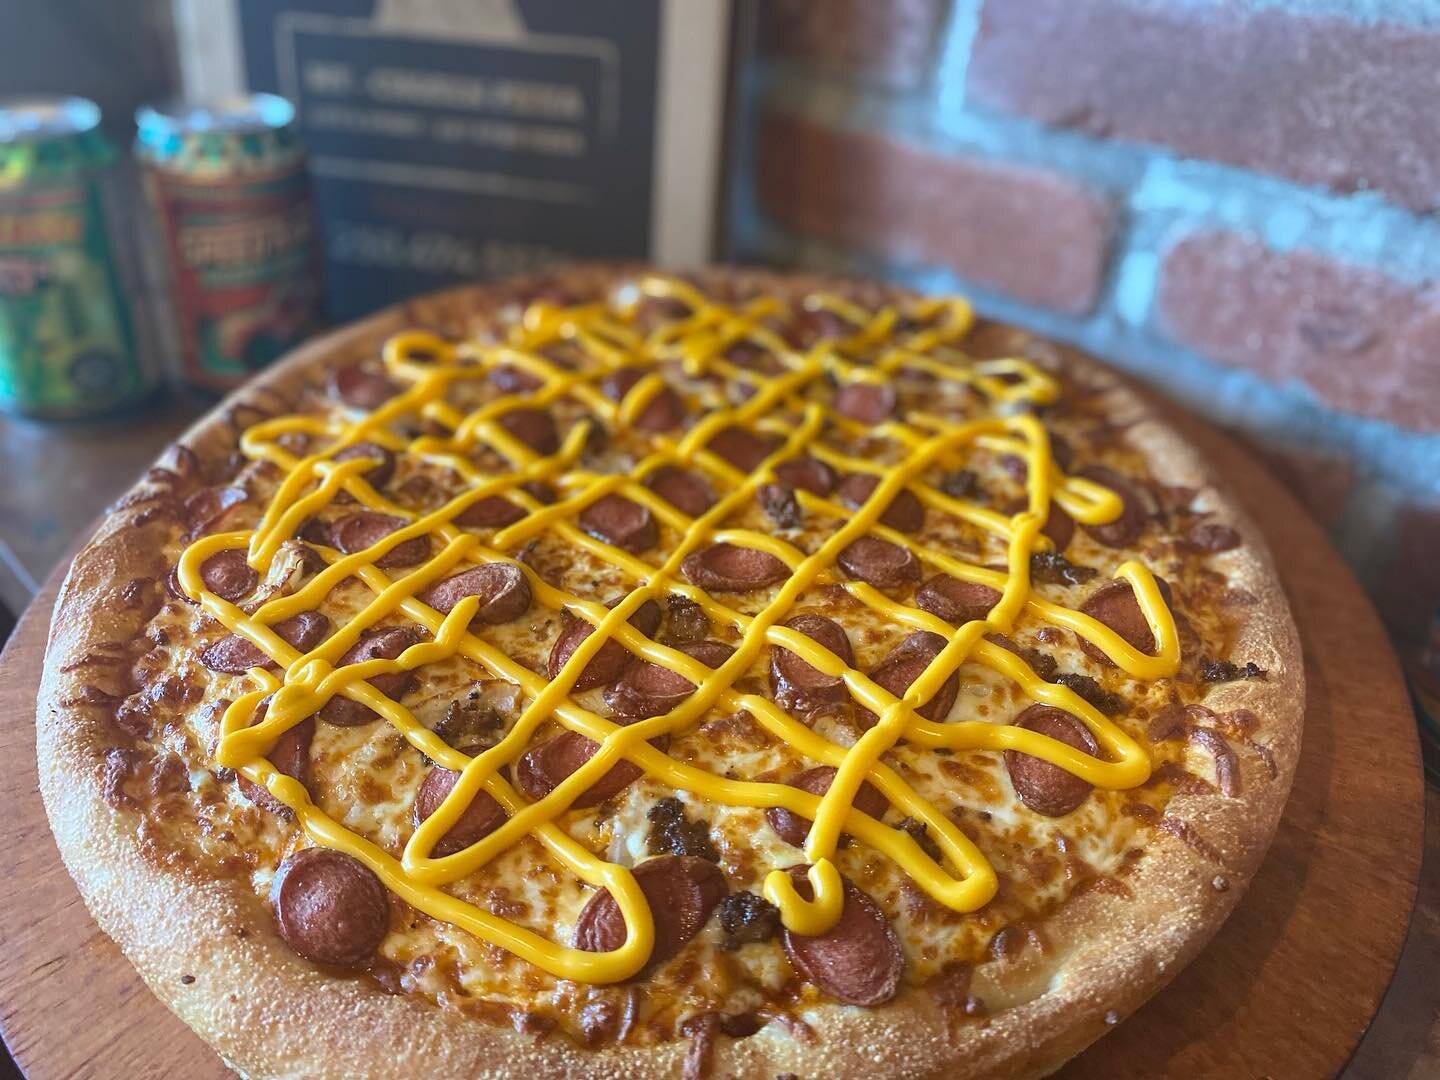 August Feature: CHILI CHEESE DOG PIZZA 🌭

Our artisan dough topped with bean chili sauce, ground beef, sliced hotdogs, onion, Edam mozza blend and finished with a drizzle of cheese sauce.

#mychosenpizza #mychosencafe #pizza #yyjpizza #yyjeats #yyjf